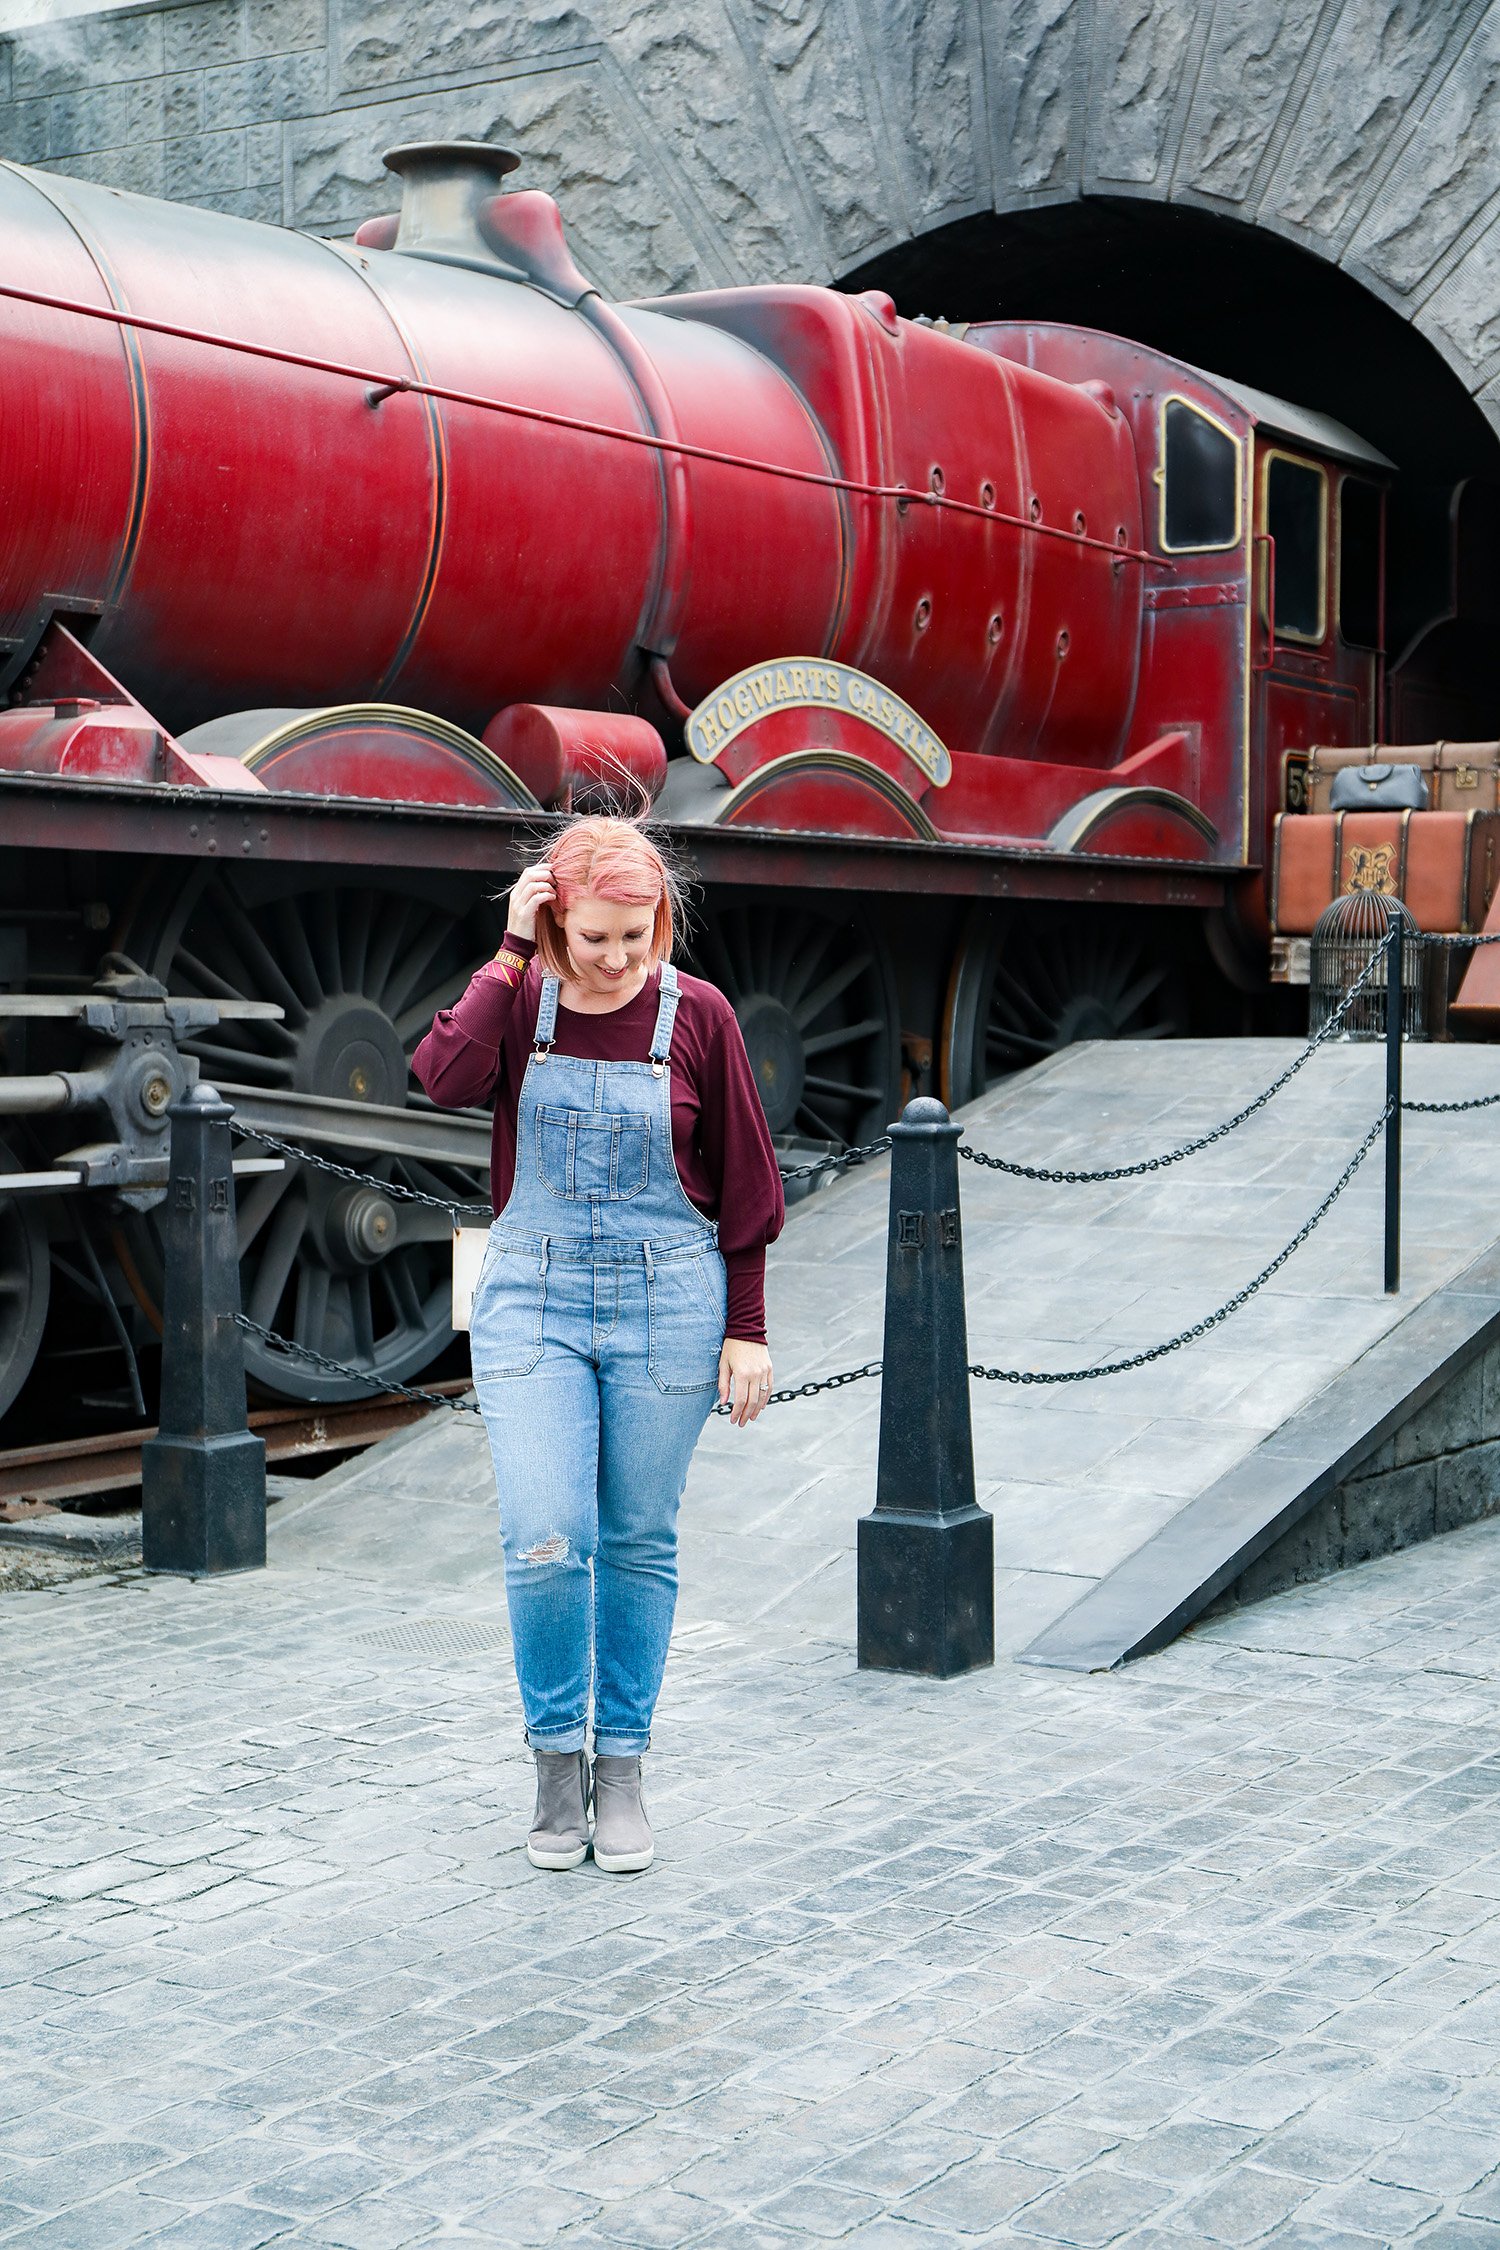 Visiting Harry Potter Land California (aka The Wizarding World of Harry Potter)? These are the BEST places to take pictures!